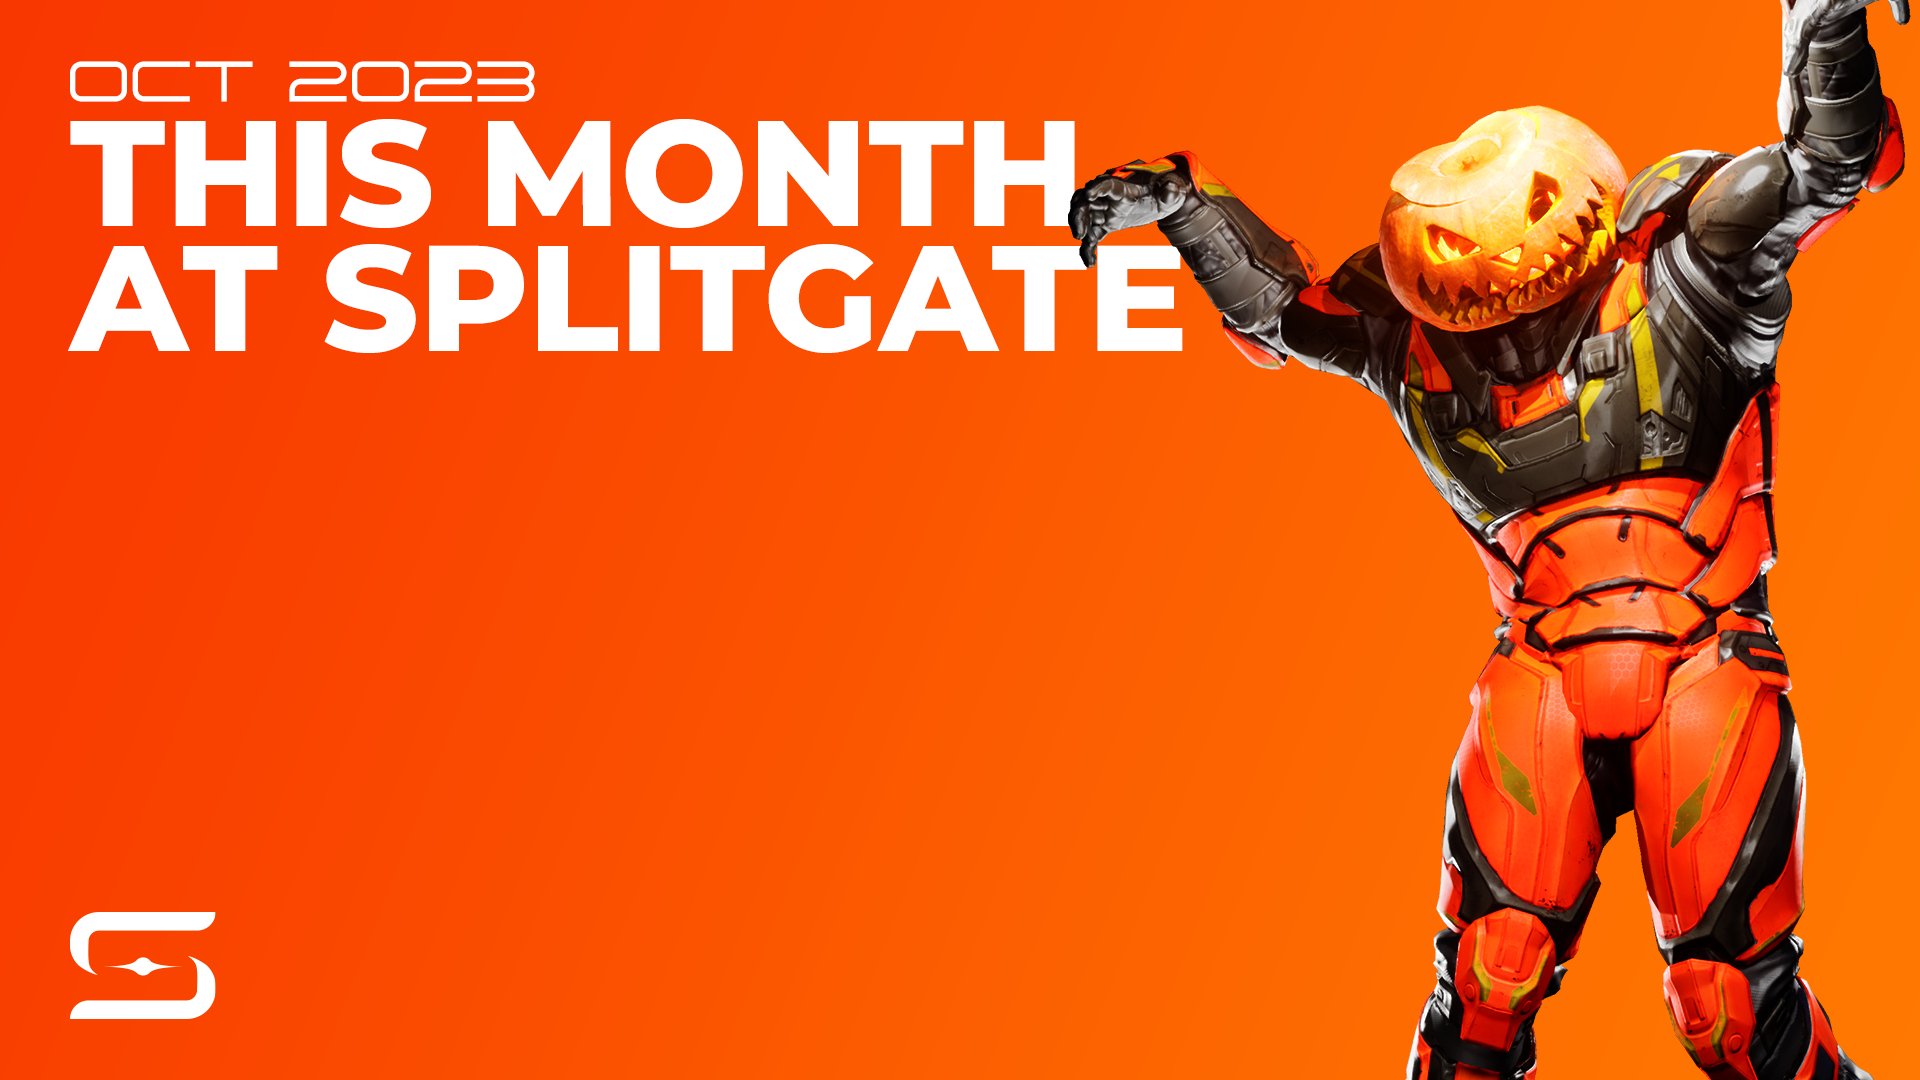 PlayStation Plus for Splitgate